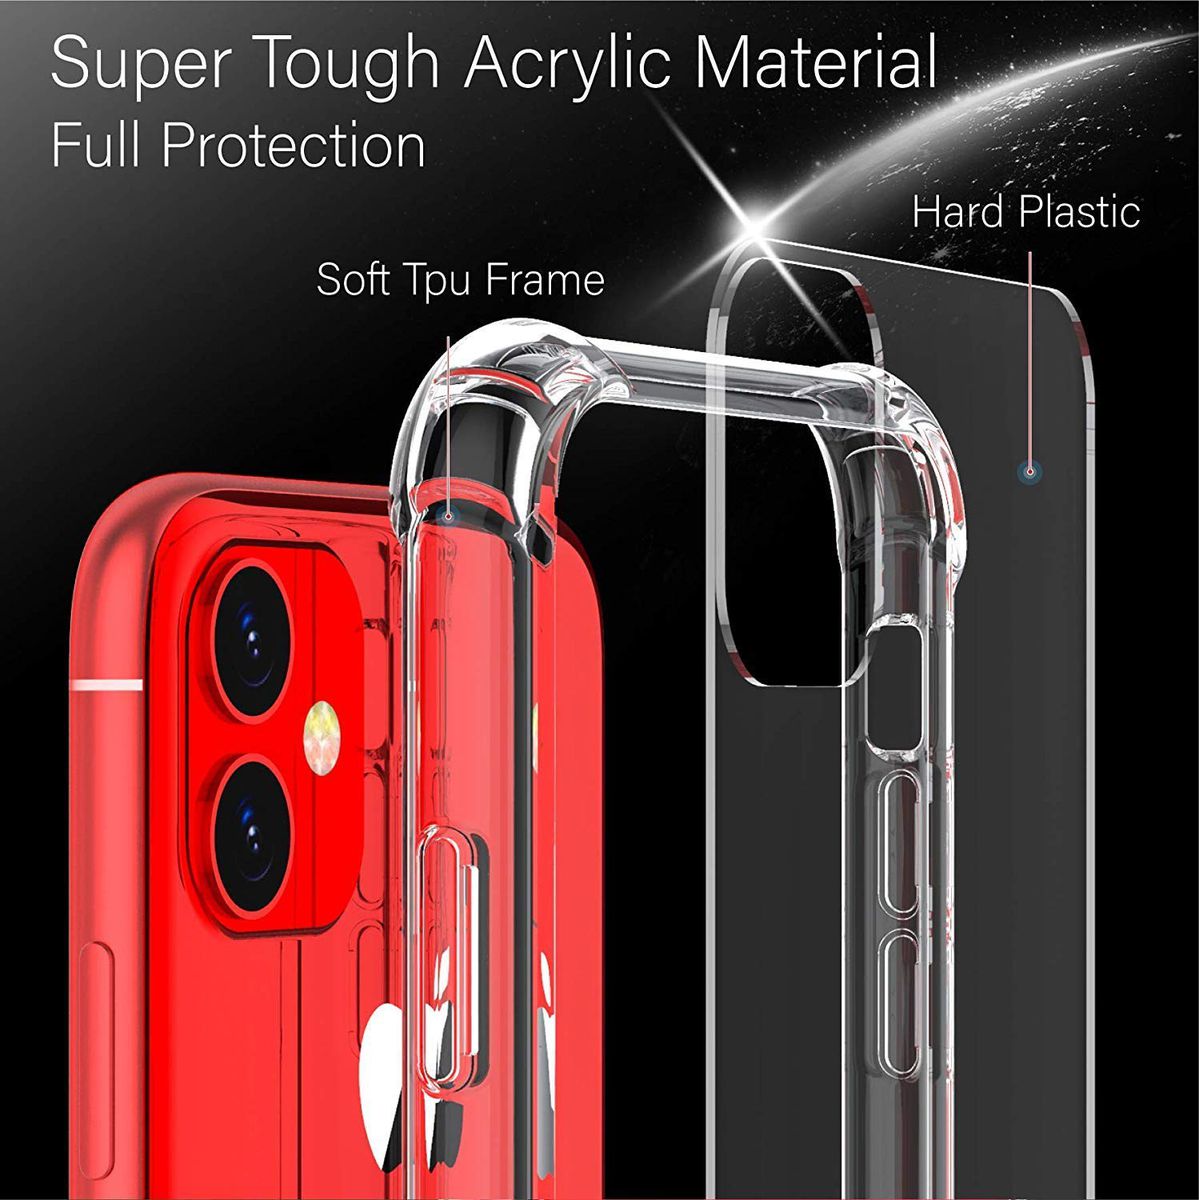 iPhone XS Max Clear Shock Resistant Armor Cover